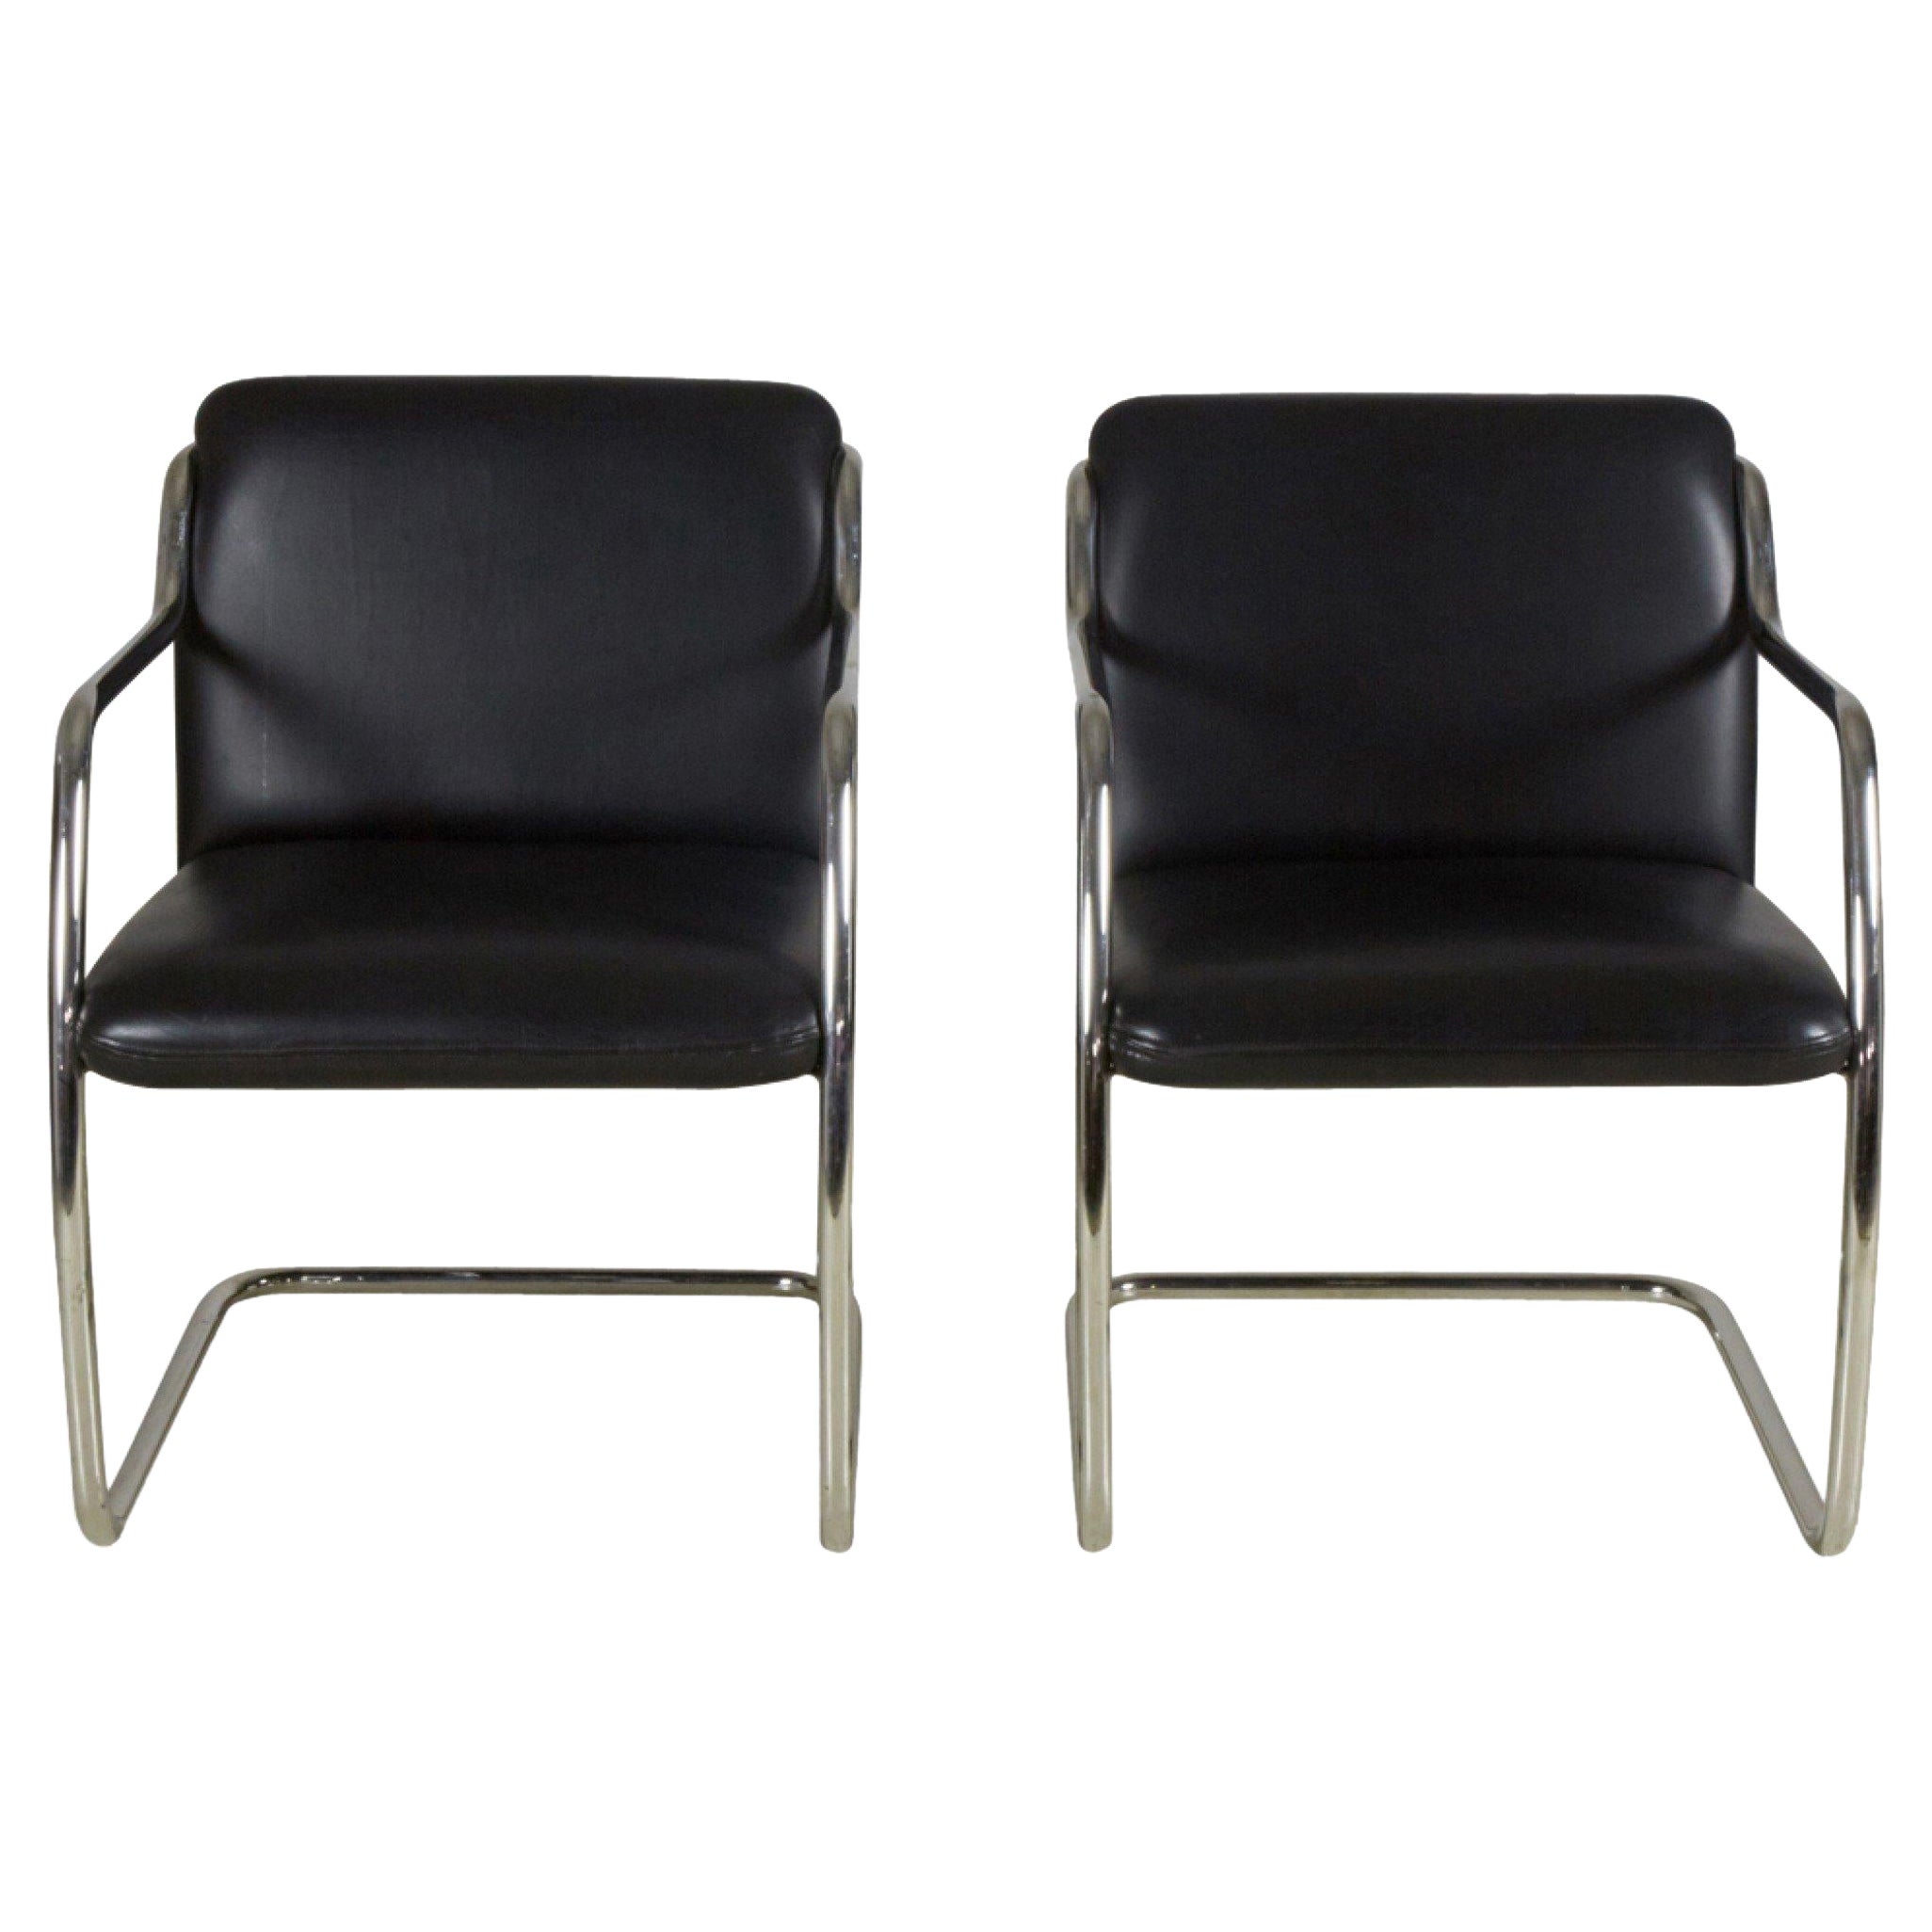 Pair of Brueton Contemporary Black Leather and Steel Tube Frame Armchairs